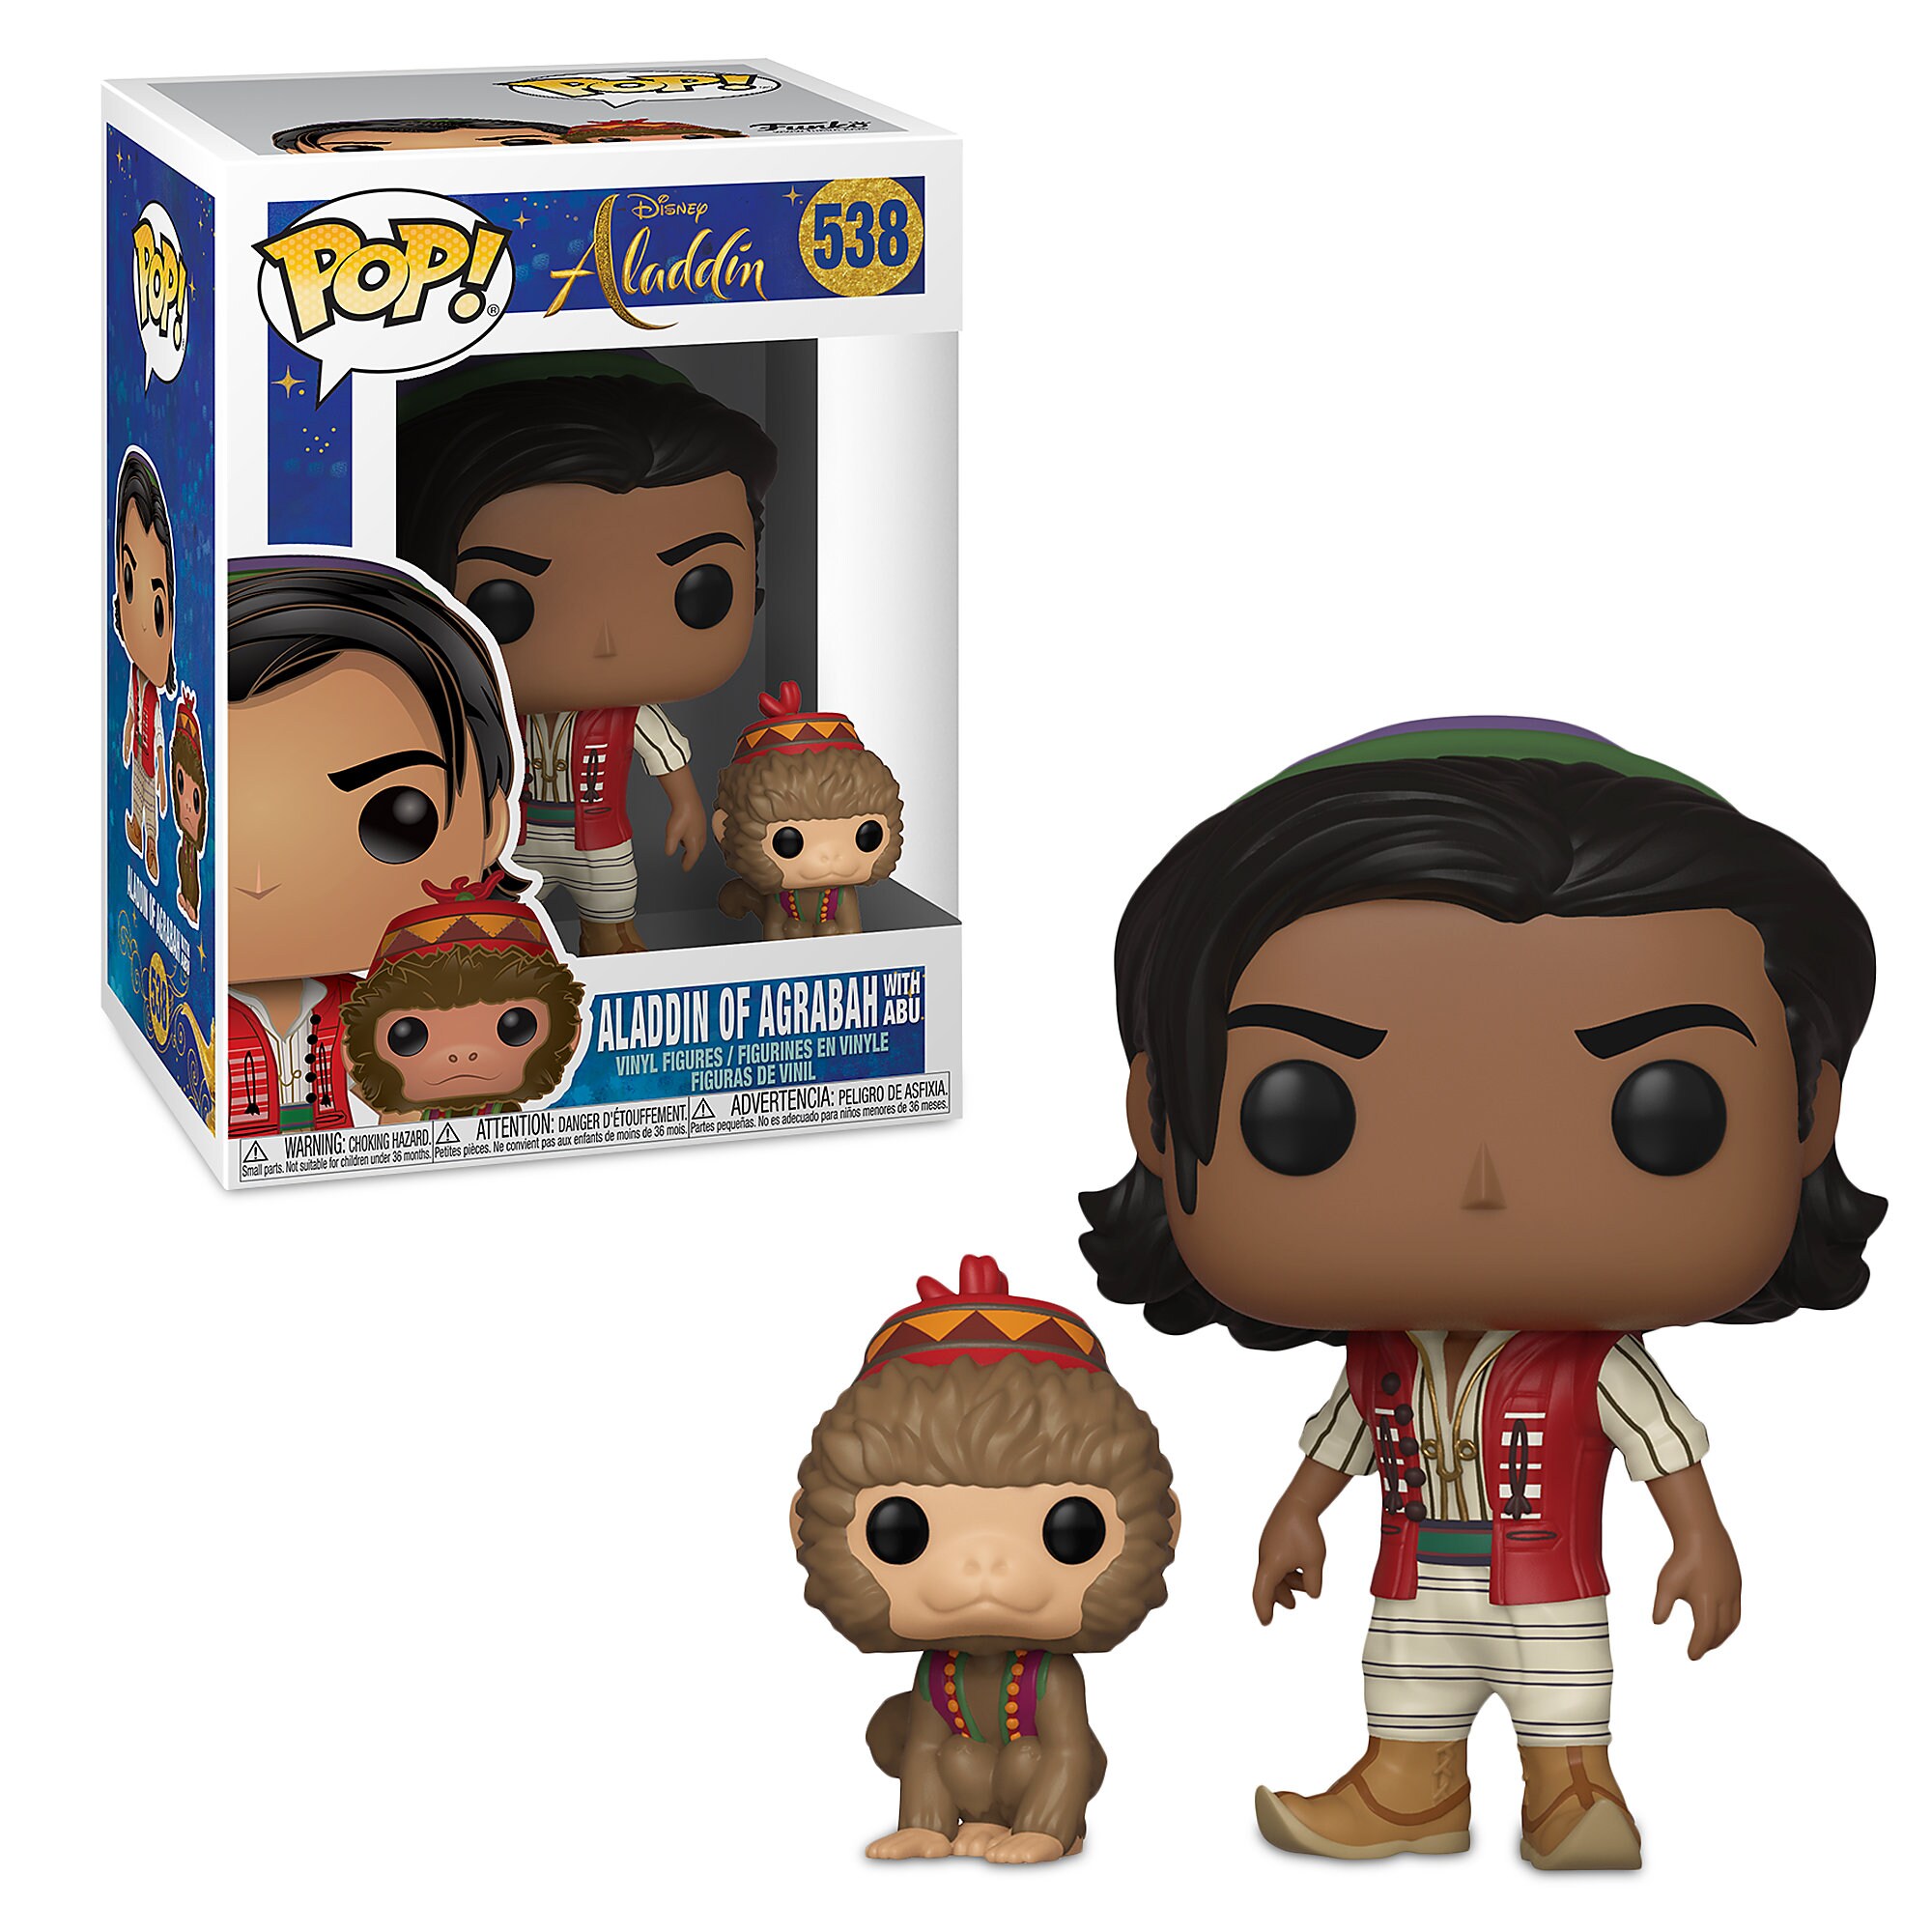 Aladdin and Abu Pop! Vinyl Figures by Funko - Live Action Film